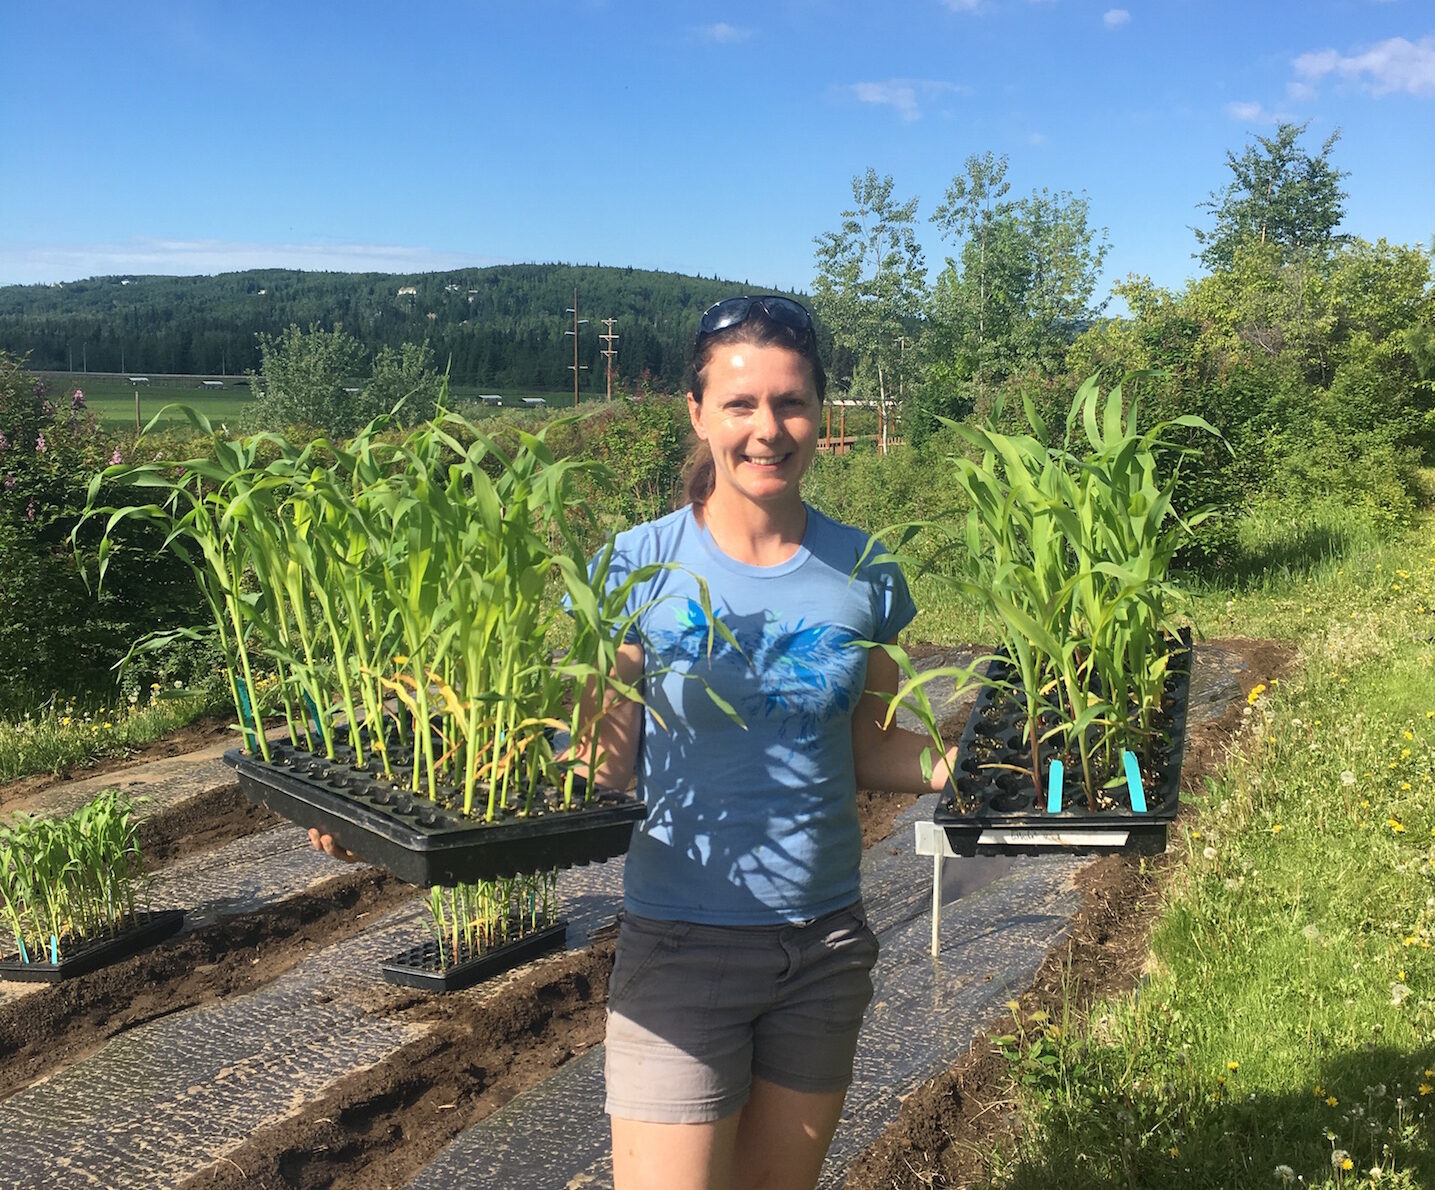 Heidi Rader hold two flats of corn seedlings and prepares to plant seedlings in a prepared garden bed with bright blue sky in the background.